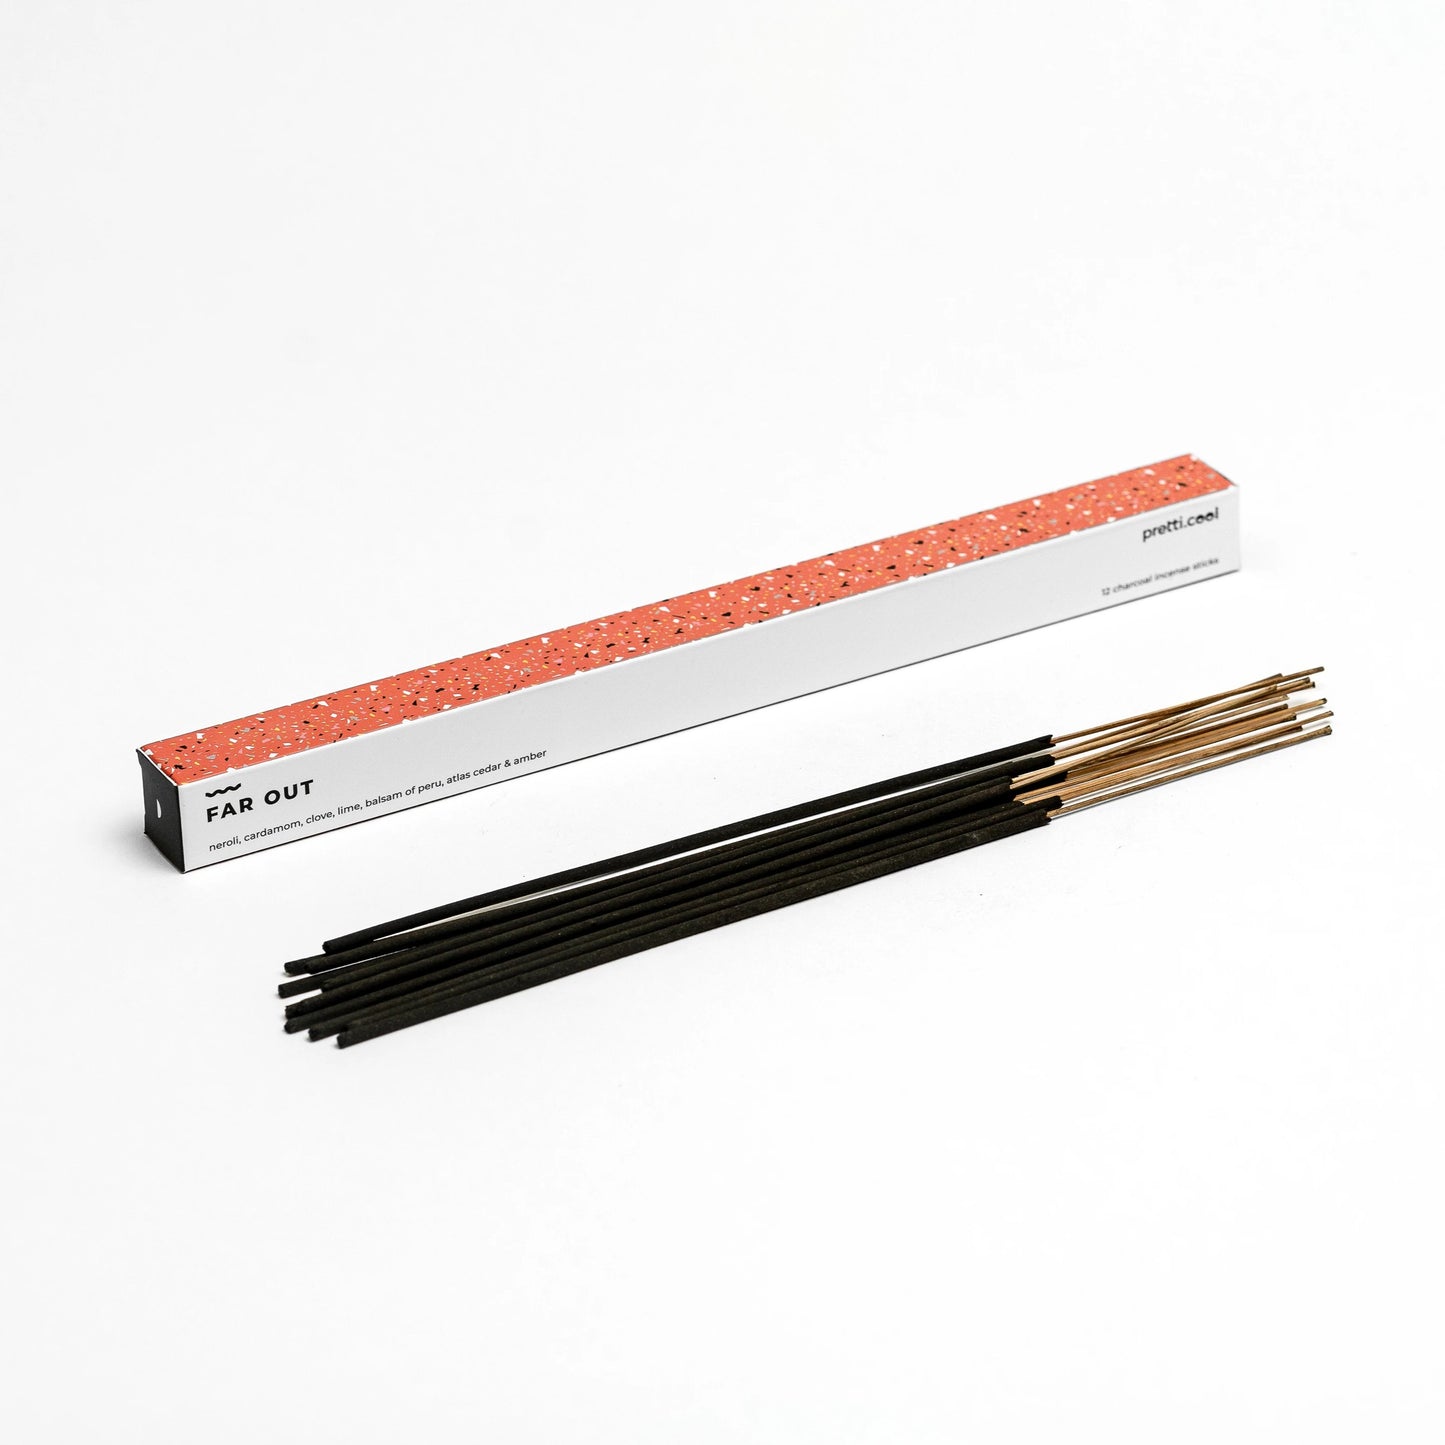 Charcoal incense sticks scented with therapeutic-grade essential oils.   Notes of: Neroli, Cardamom, Clove, Lime, Balsam of Peru, Atlas Cedar & Amber